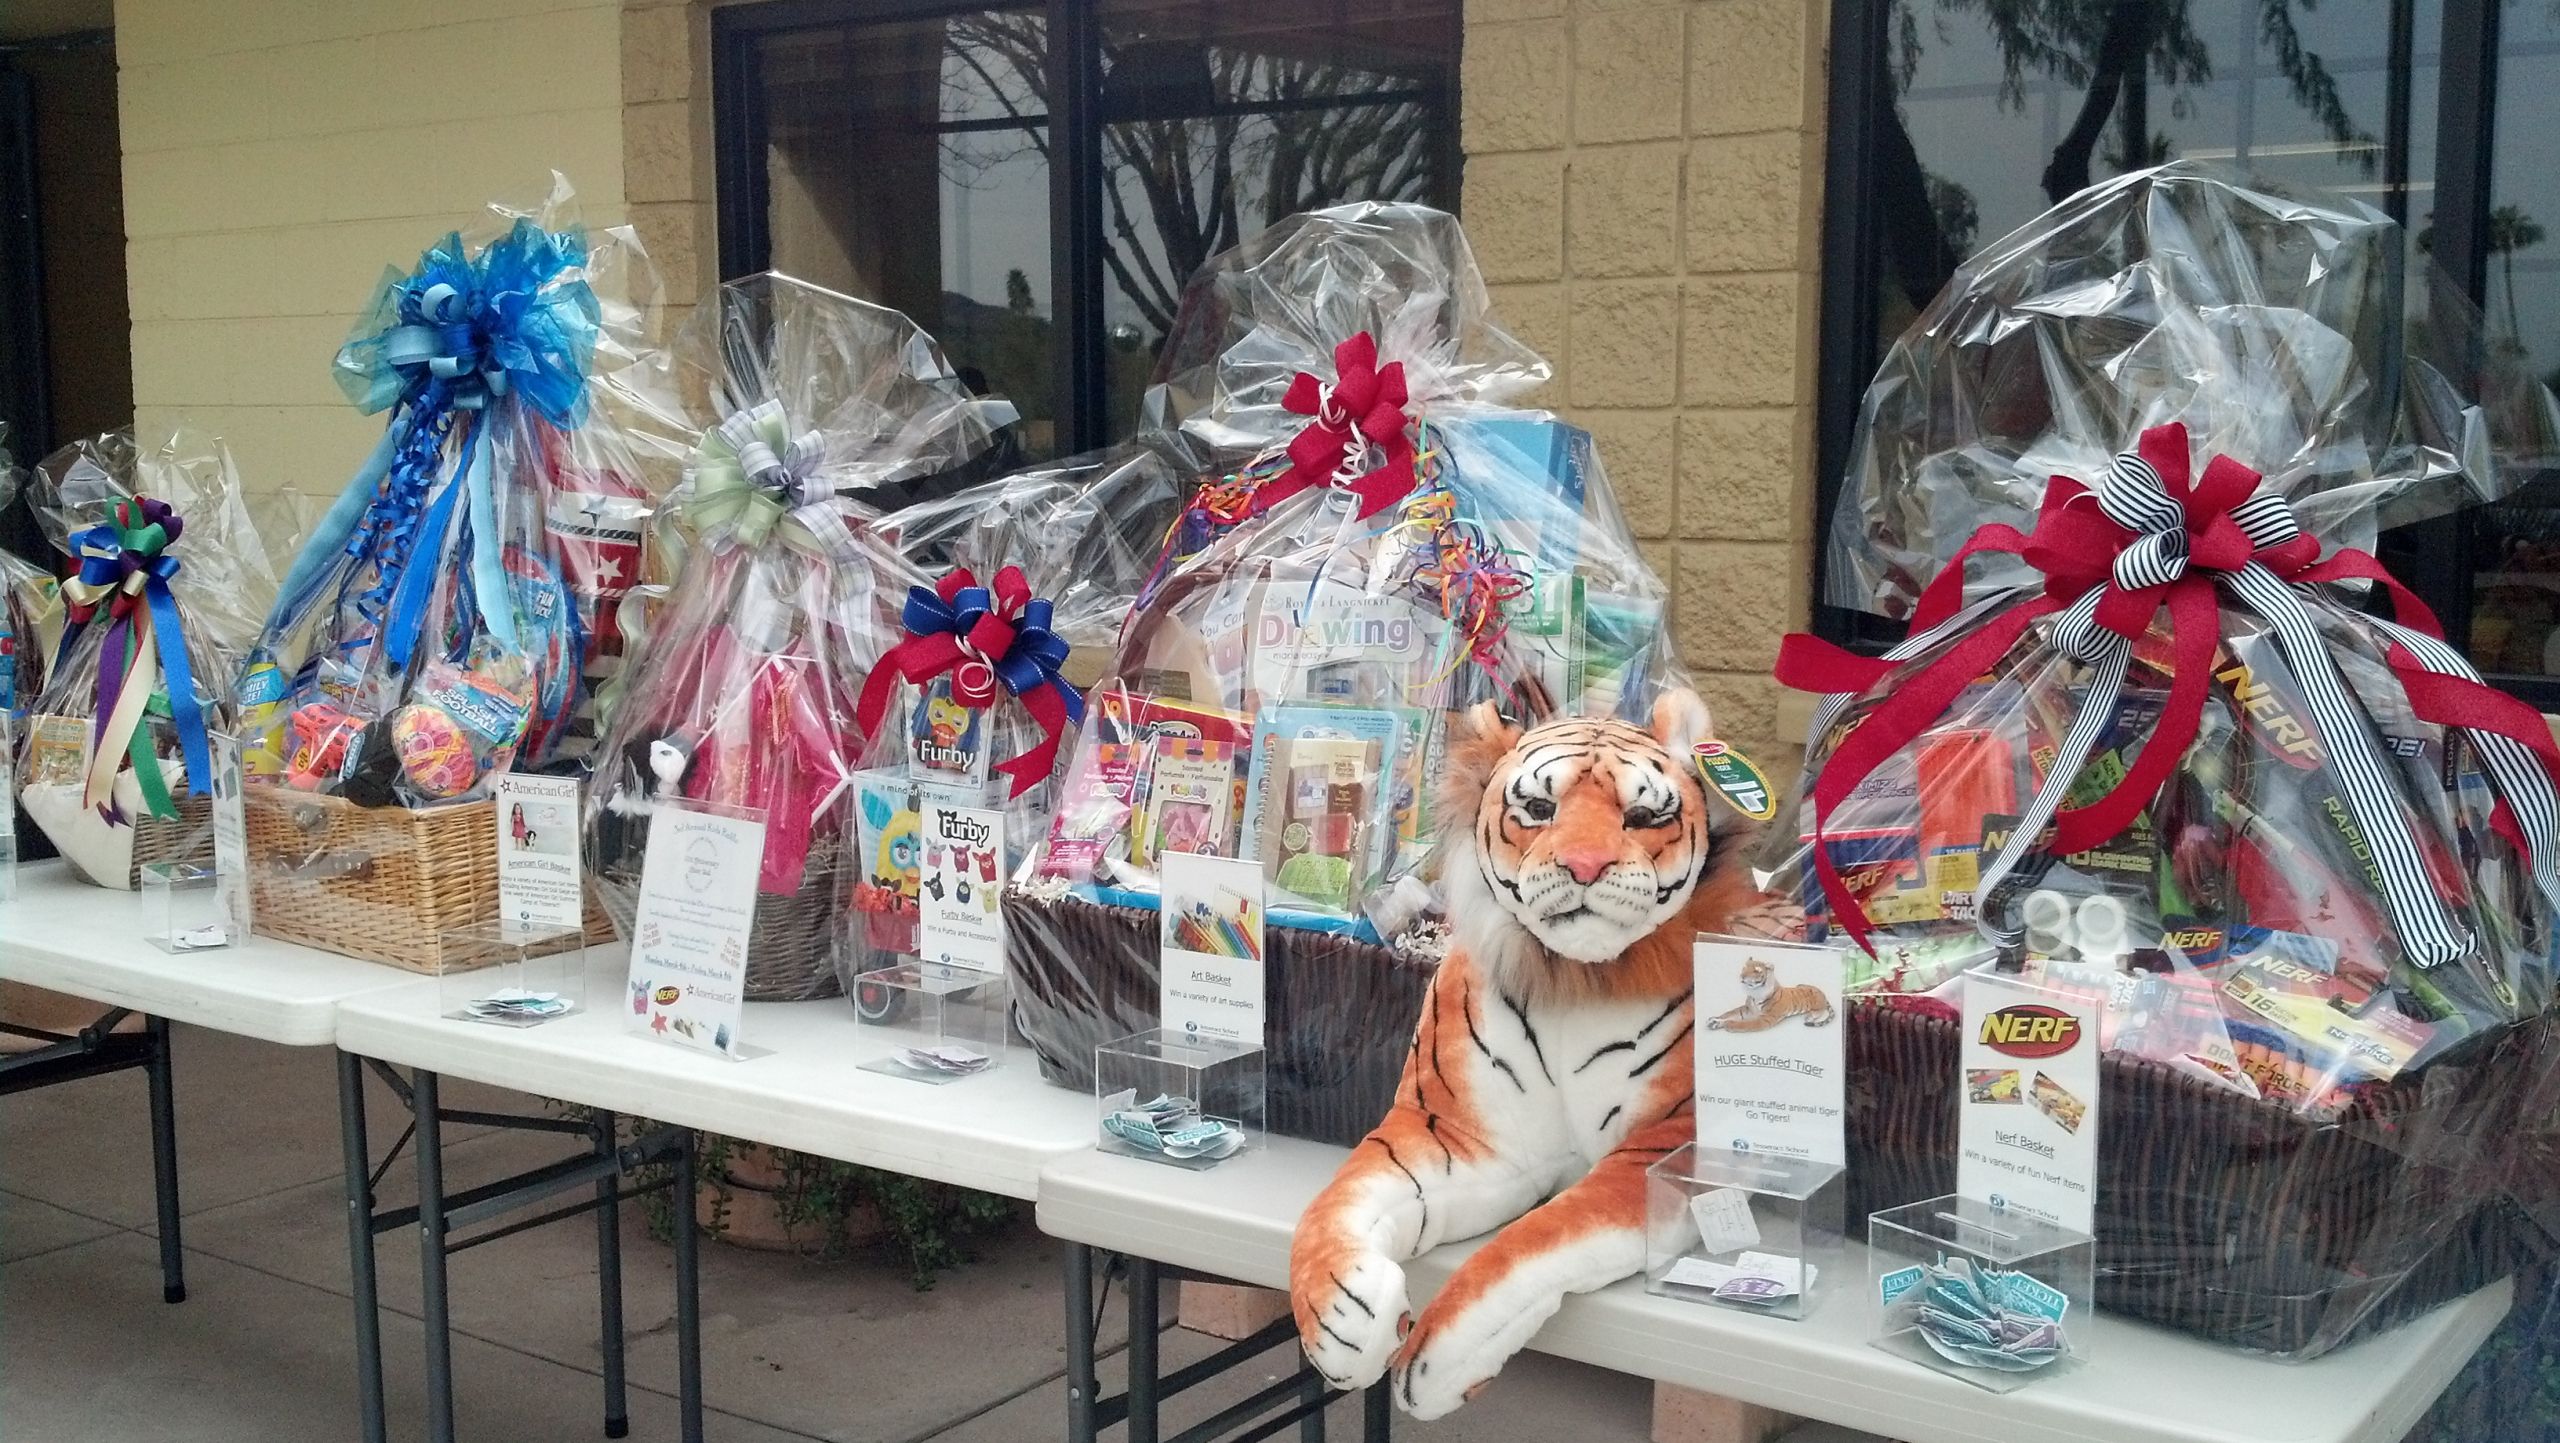 Gift Baskets For Raffle Ideas
 Special Event and Silent Auction Gift Basket Ideas by M R